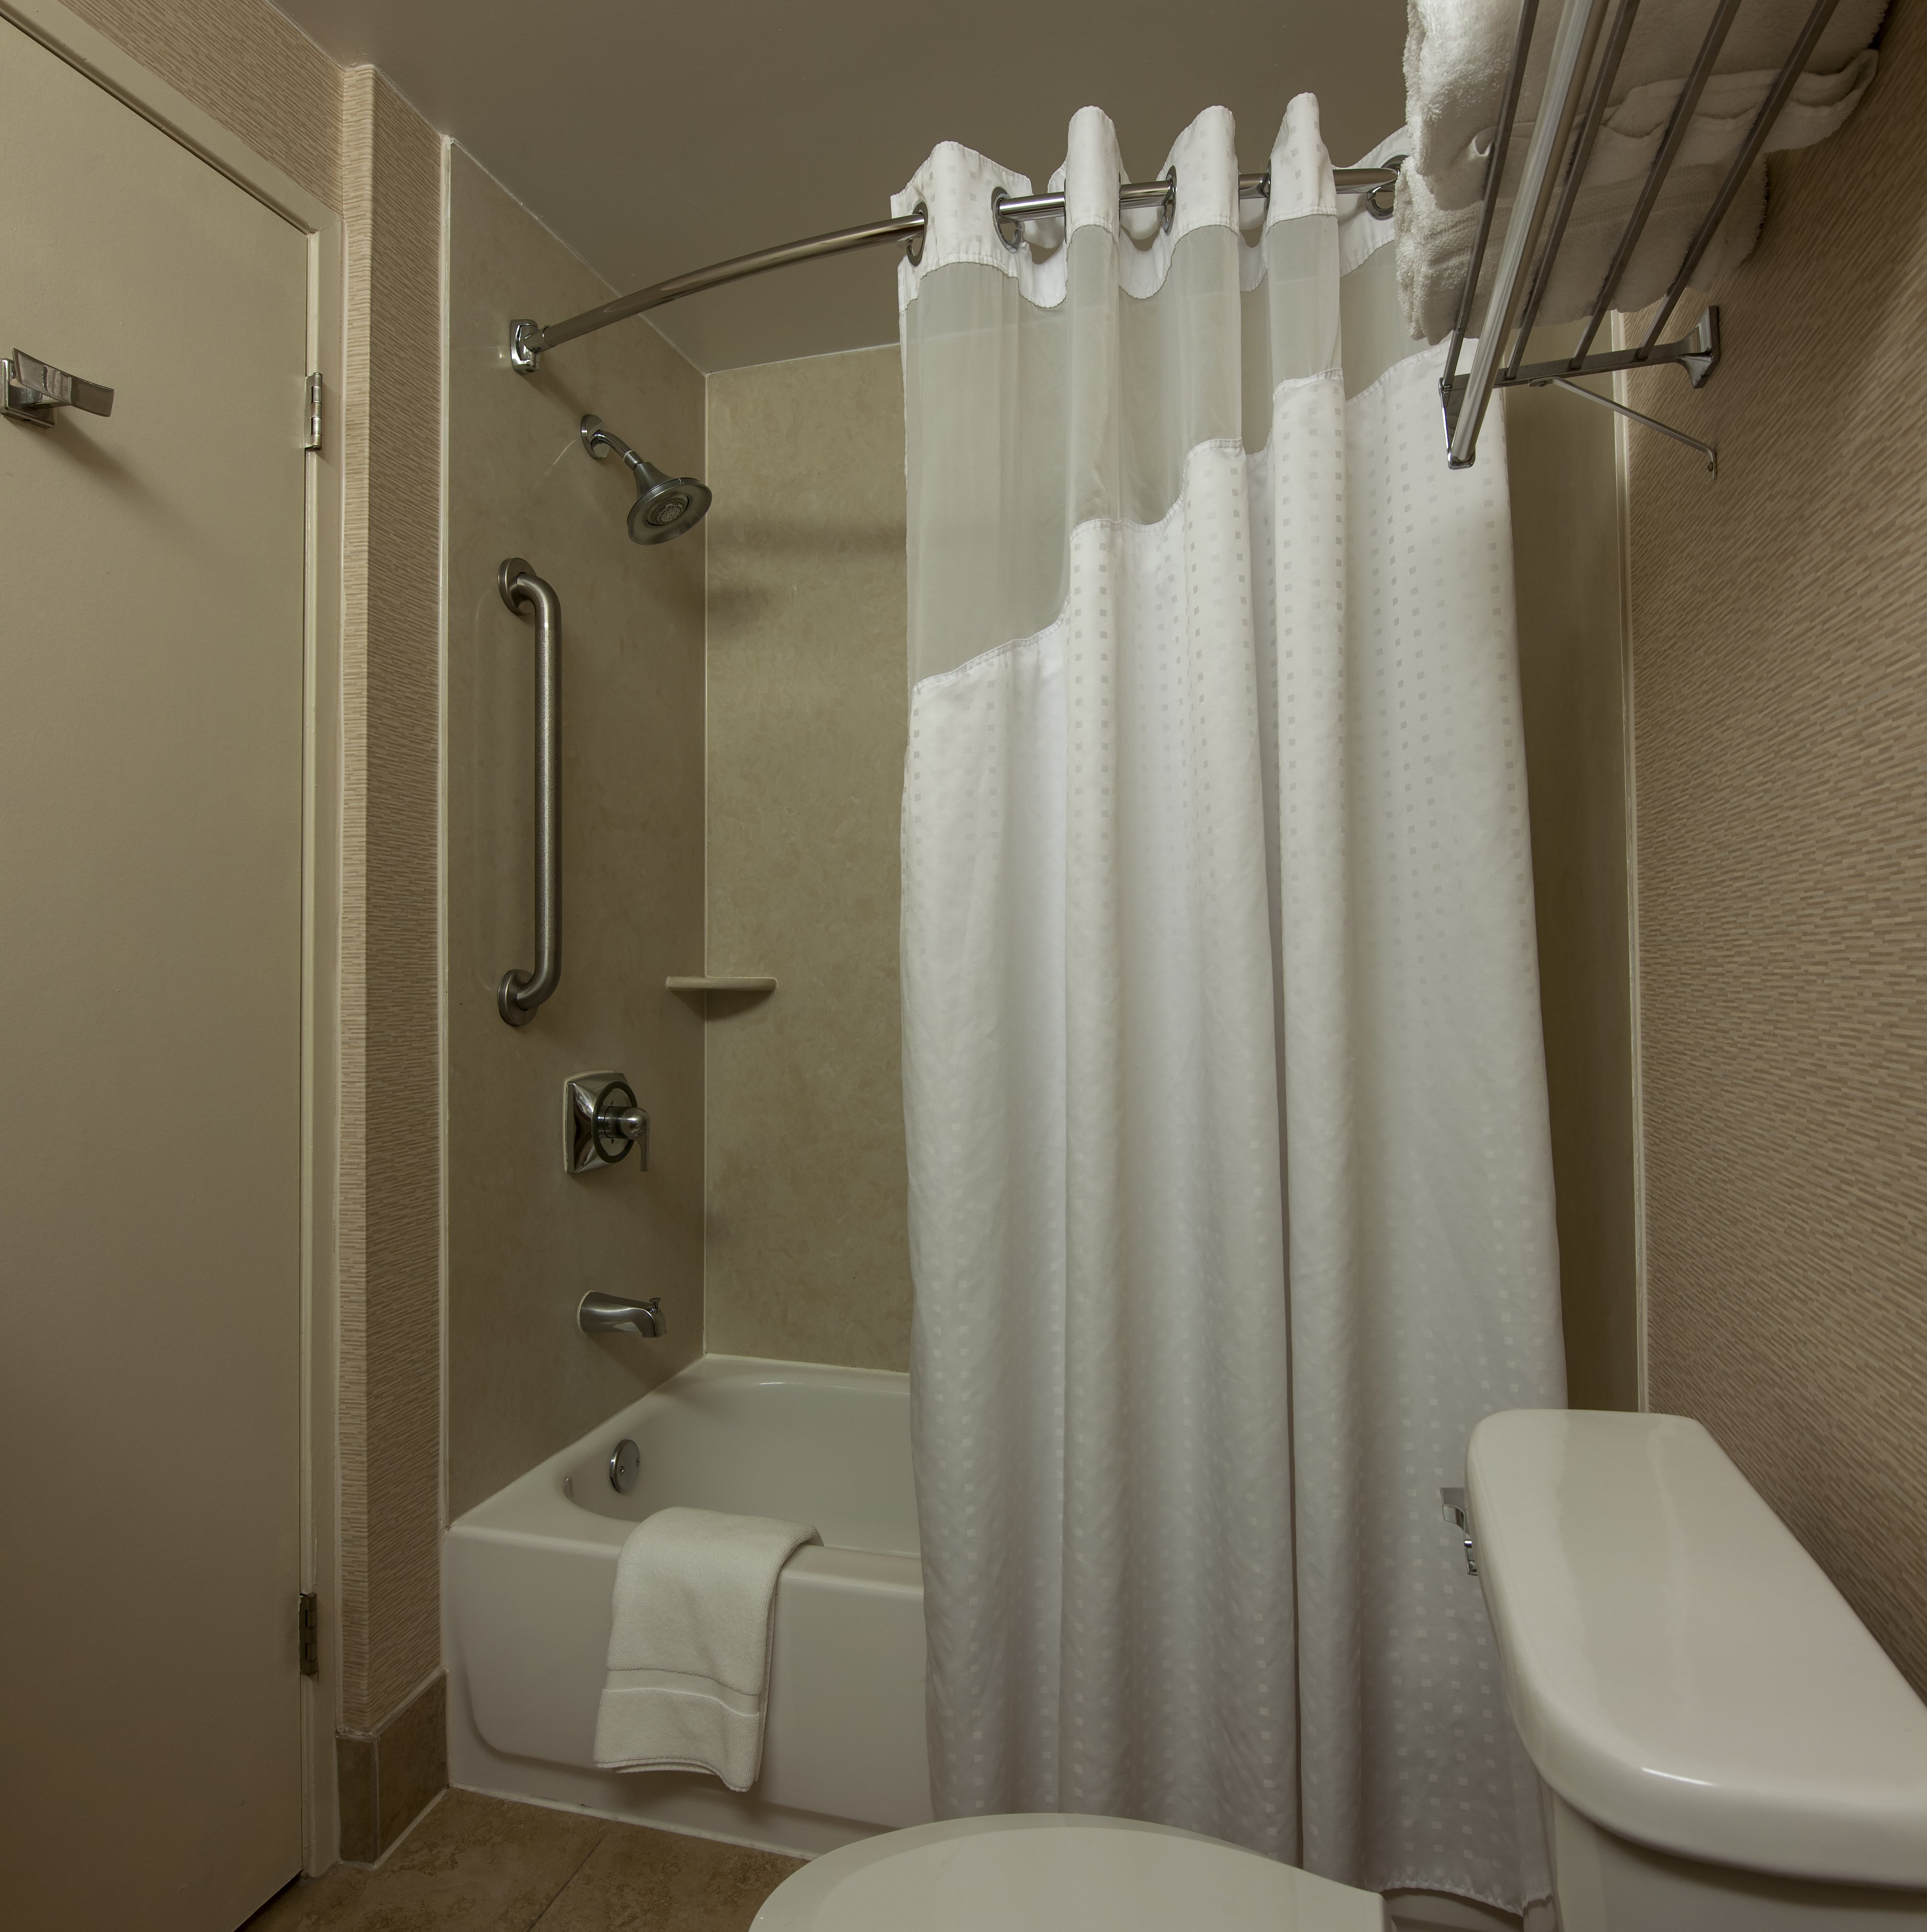 Full Guest Room Bathroom With Curved Shower Rod 